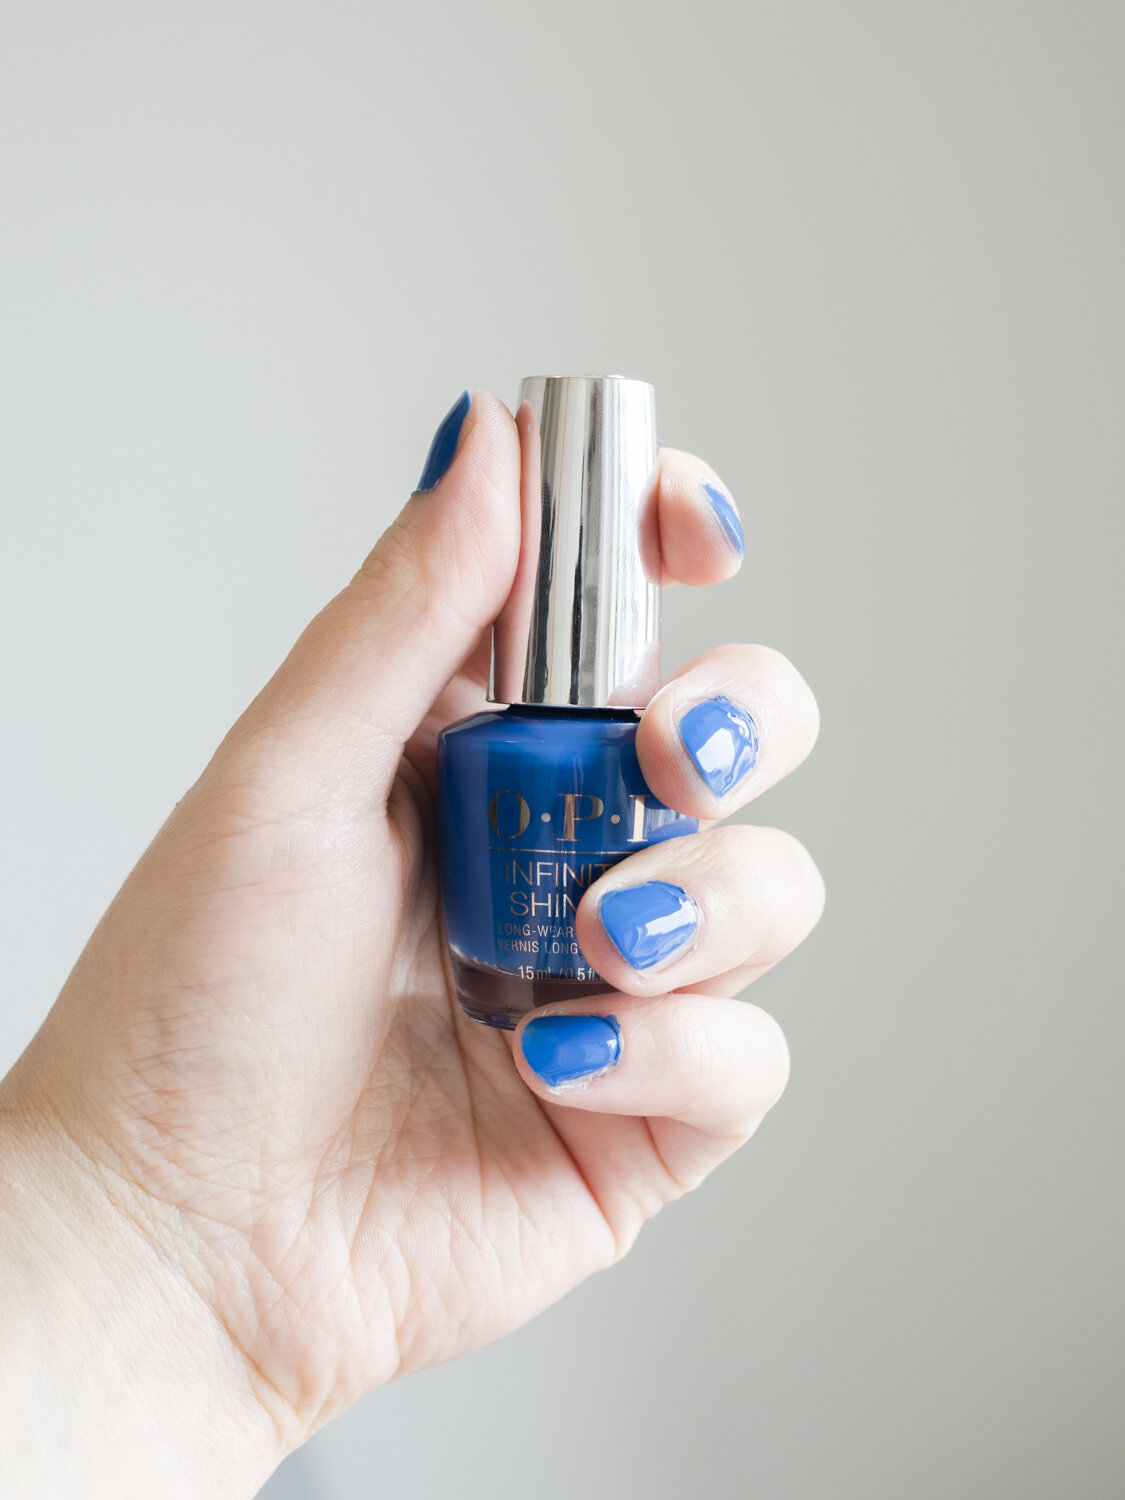 I never get tired of the blue sky” - Vincent Van Gogh Trying to find the  best classy nail design yet practical for any occasion? This “no doubt”  manicure is just right!